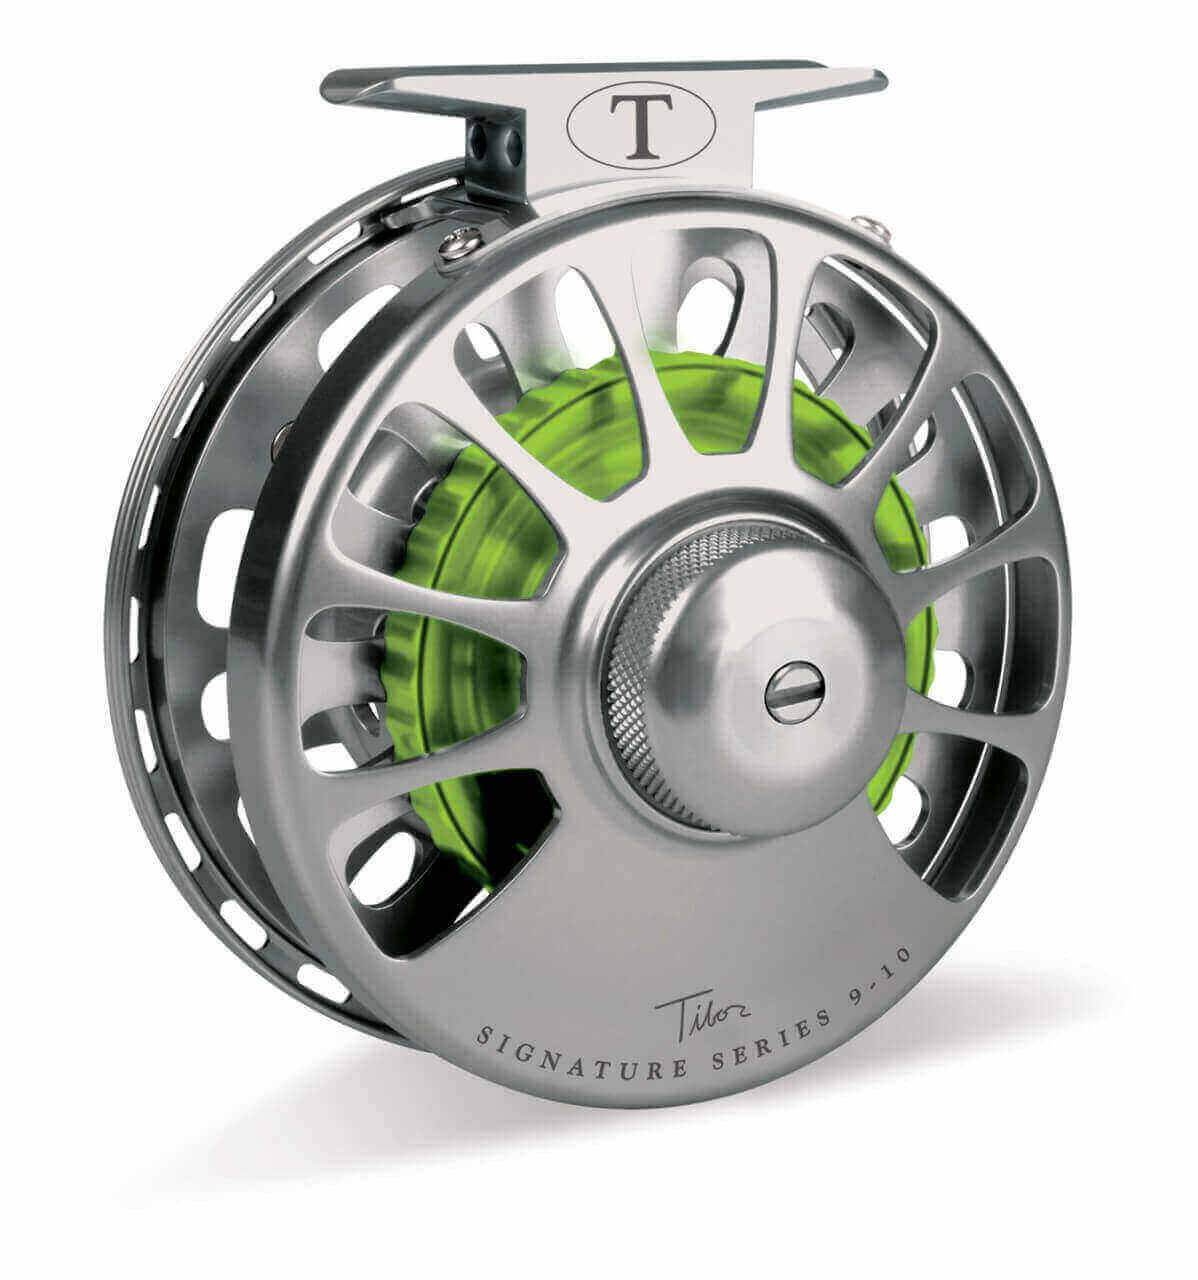 https://tellurideangler.com/wp-content/uploads/2017/12/products-9-10_Graph_Lime_hub__30118.jpg